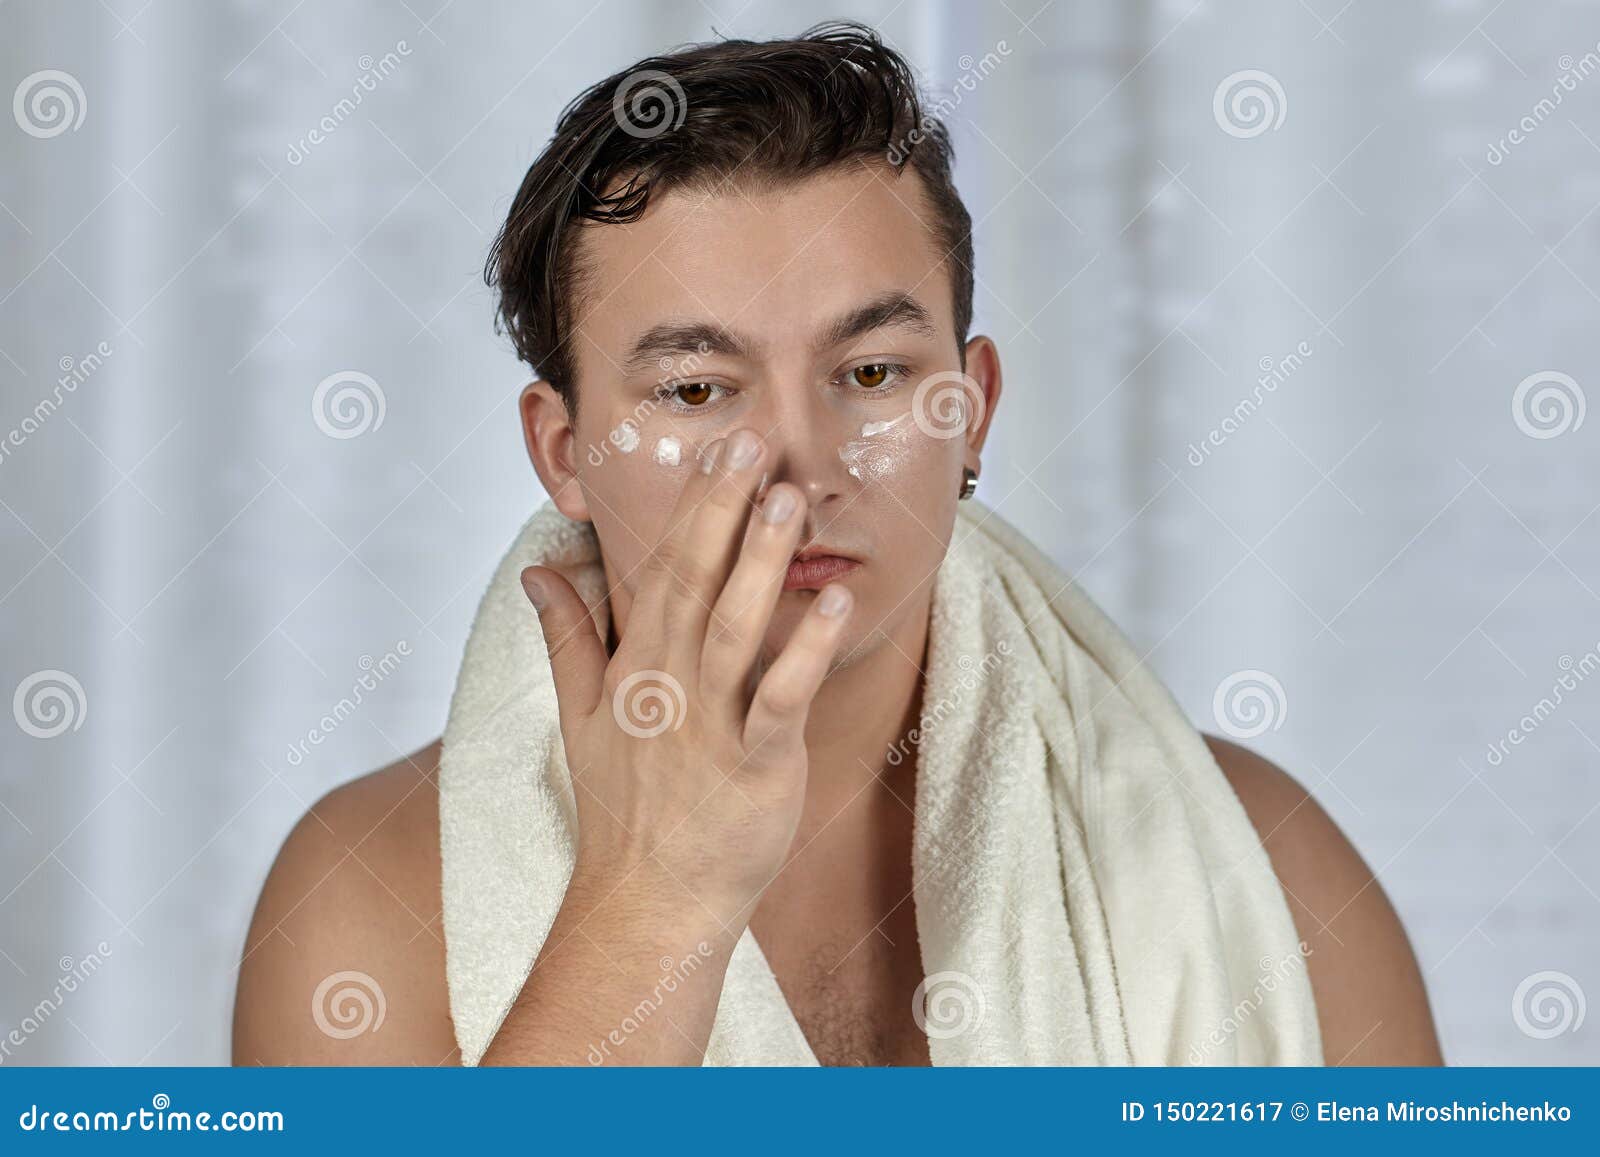 young handsome caucasian man applying cream under the eyes, towel on shoulders. caring face, metrosexual daily routine in the bath